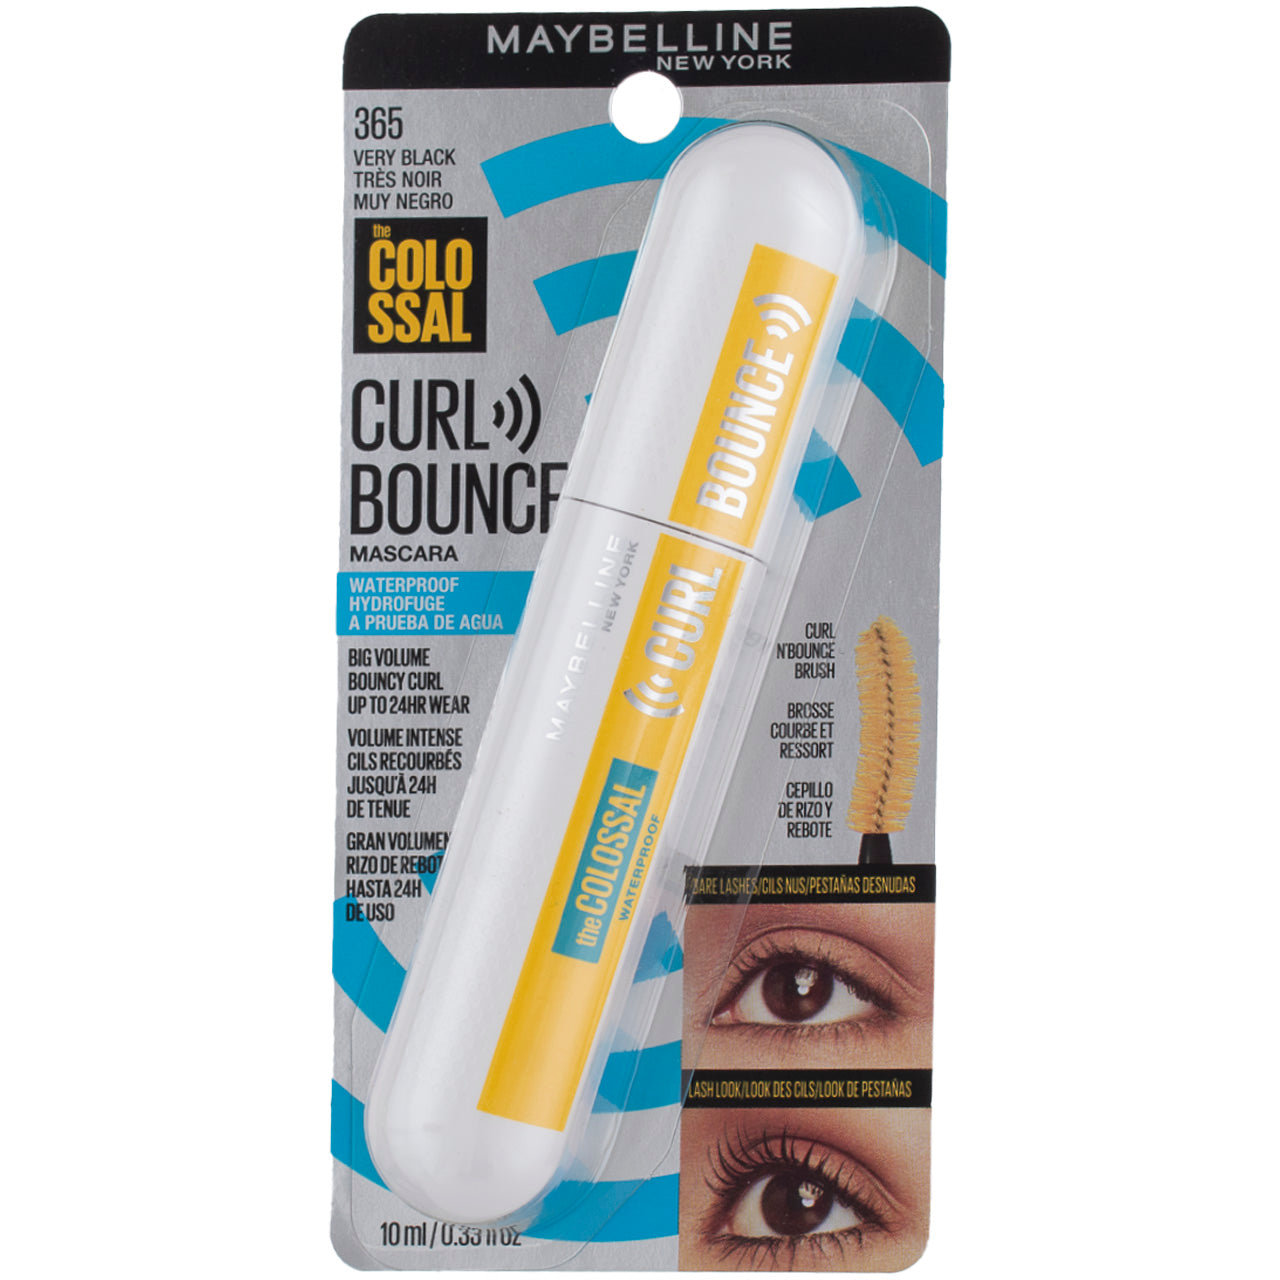 Curl Bouncing Black 365, Maybelline – Very Mascara, Colossal fl 0.33 Vitabox The